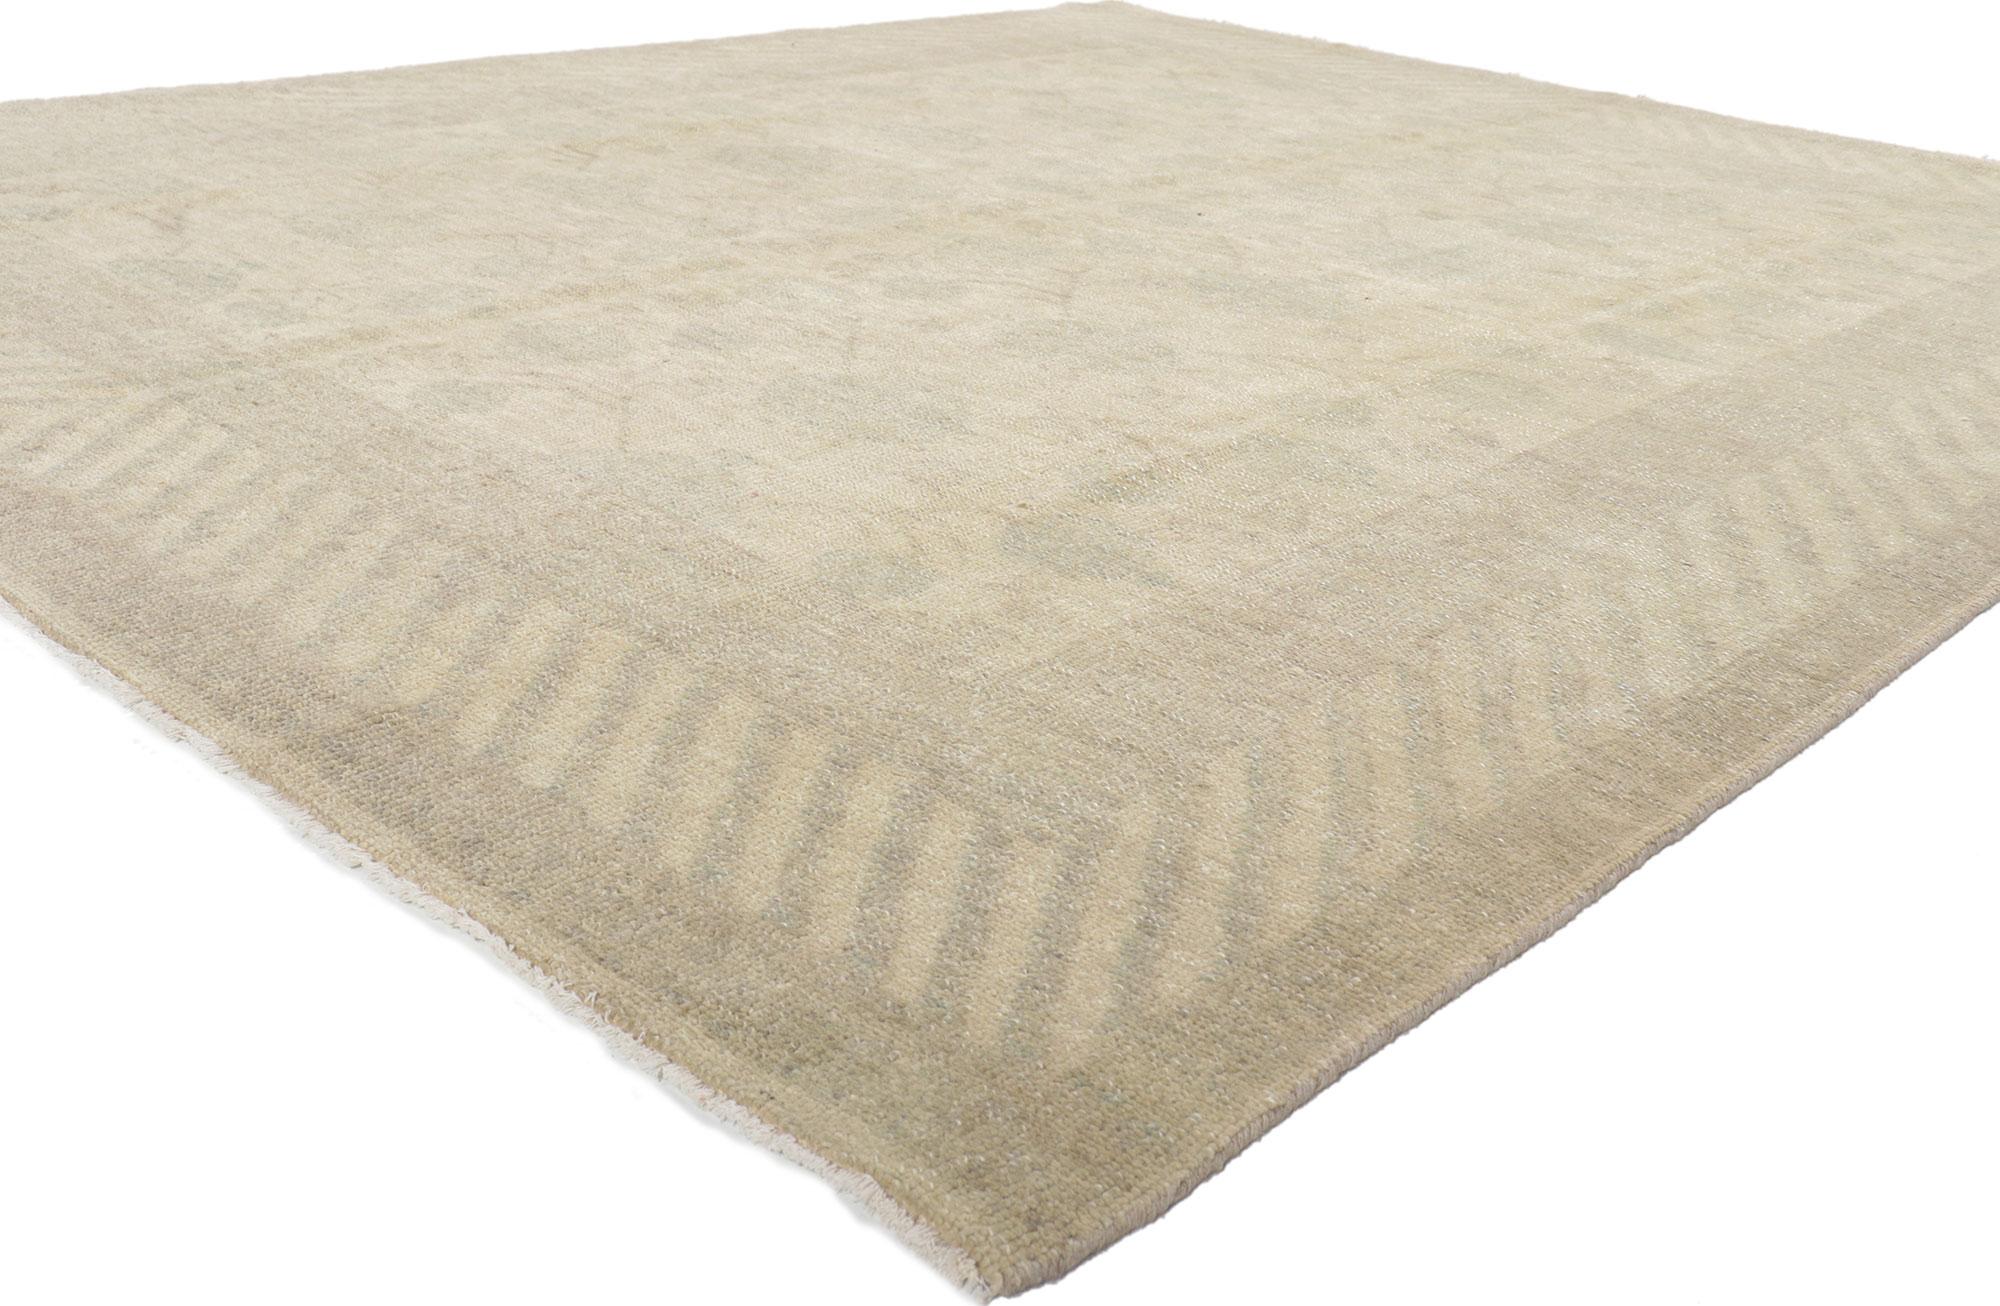 30096 New Vintage-Inspired Khotan Rug with Transitional Style, 08'01 x 09'09. Softer yet no less striking, this hand knotted wool vintage-inspired Khotan area rug showcases a transitional style. The pale muted color palette relaxes a repetitive